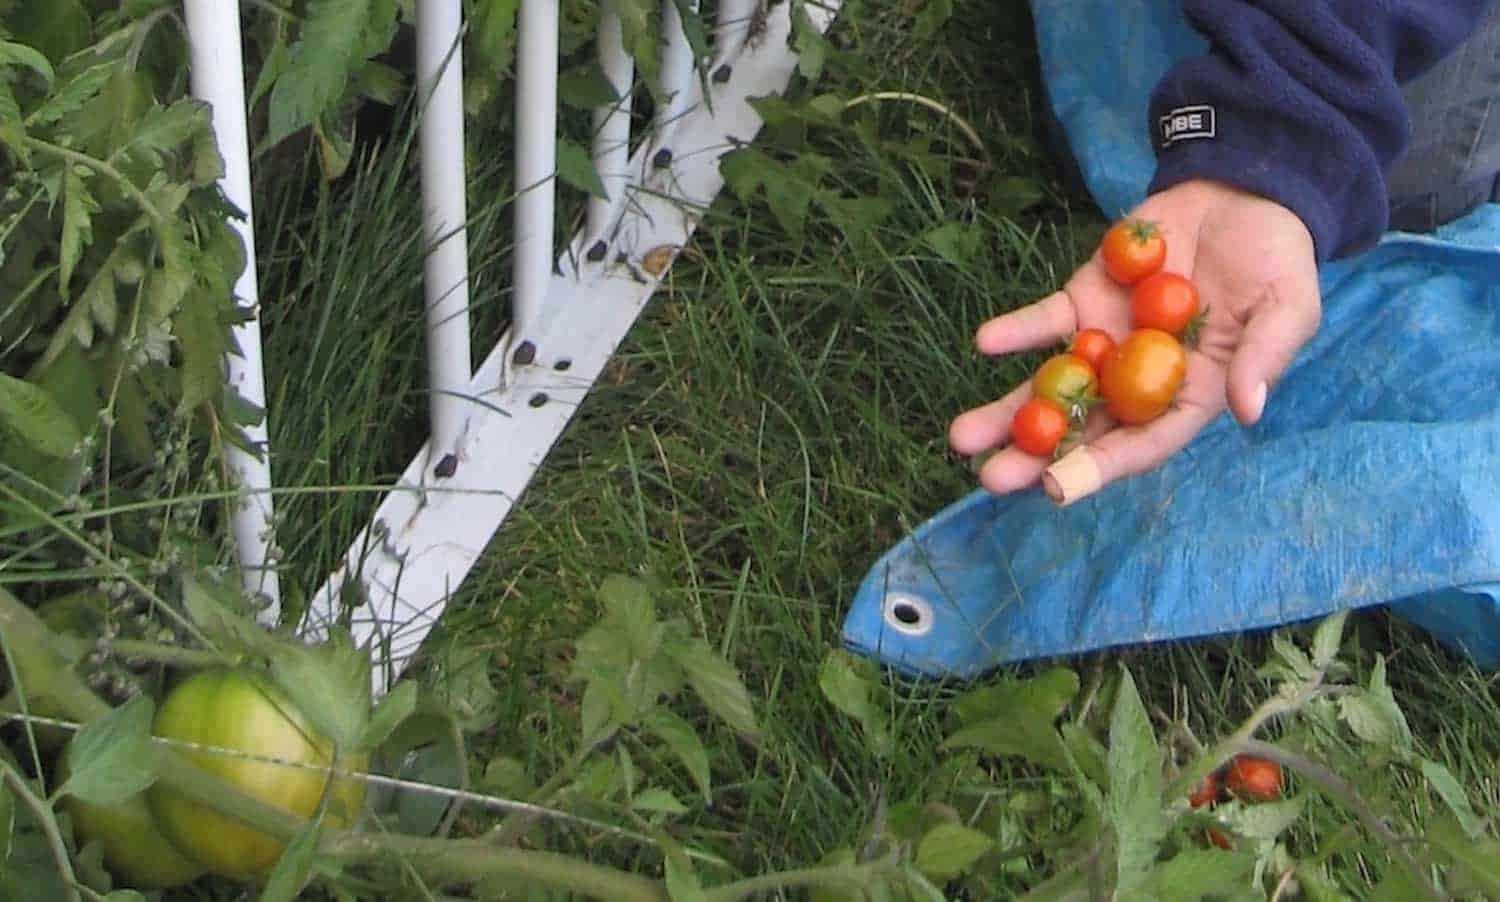 The Ontario Indigenous Neighbours program from the Mennonite Central Committee is cultivating communities starting with seeds.